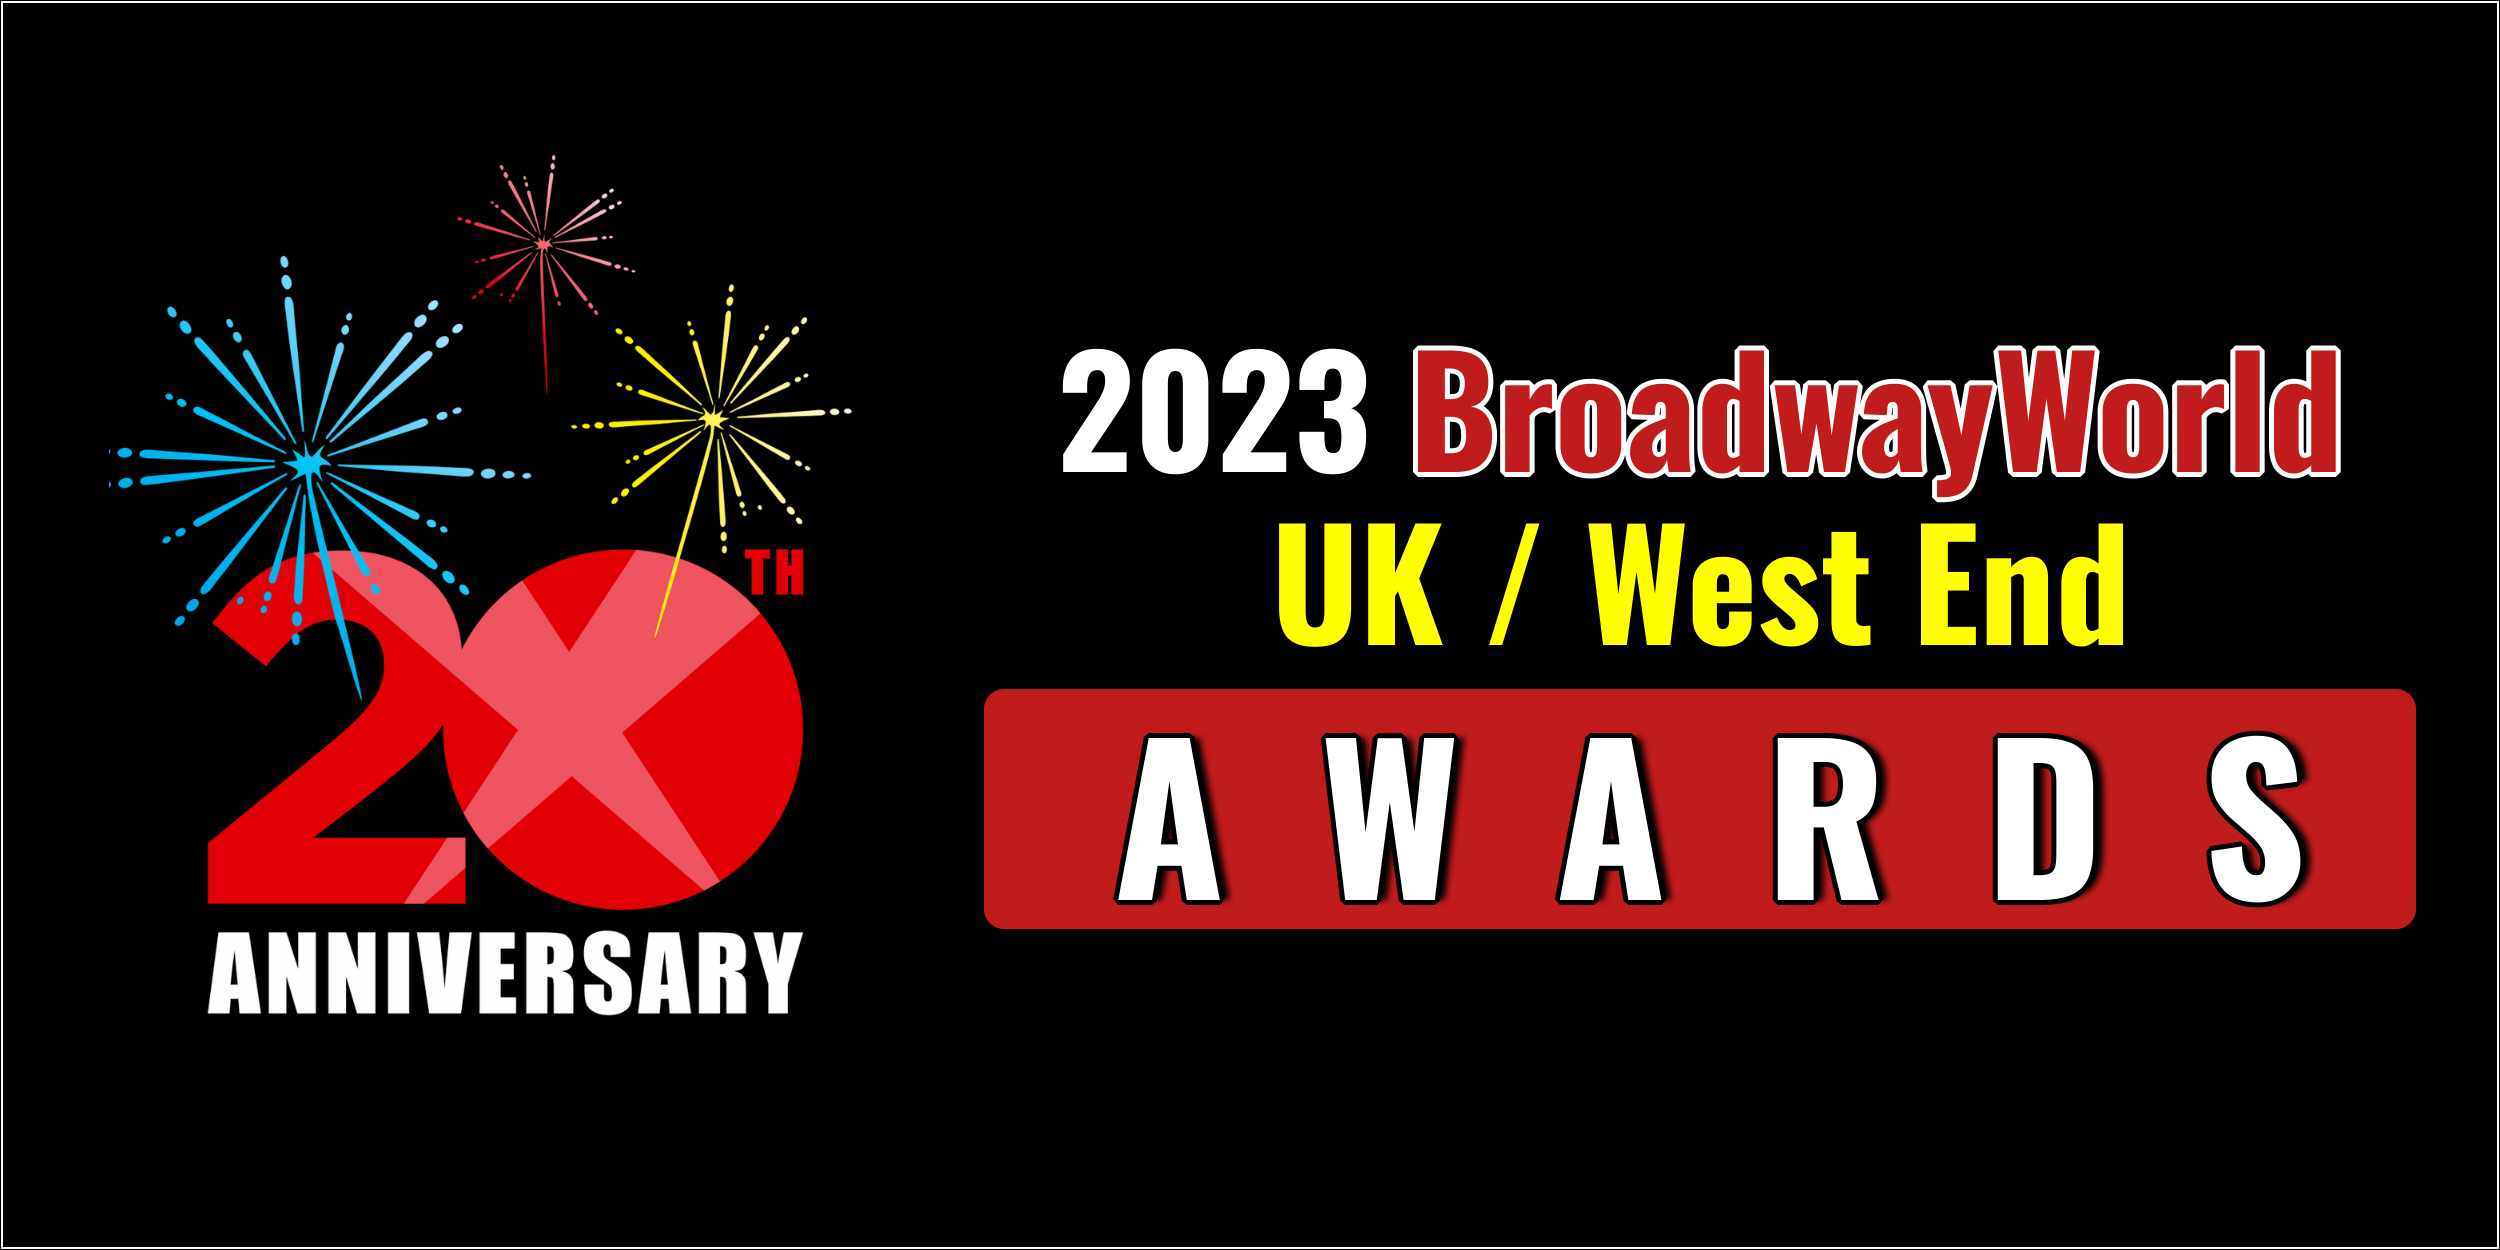 Latest Standings Announced For The 2023 BroadwayWorld UK / West End Awards! Photo